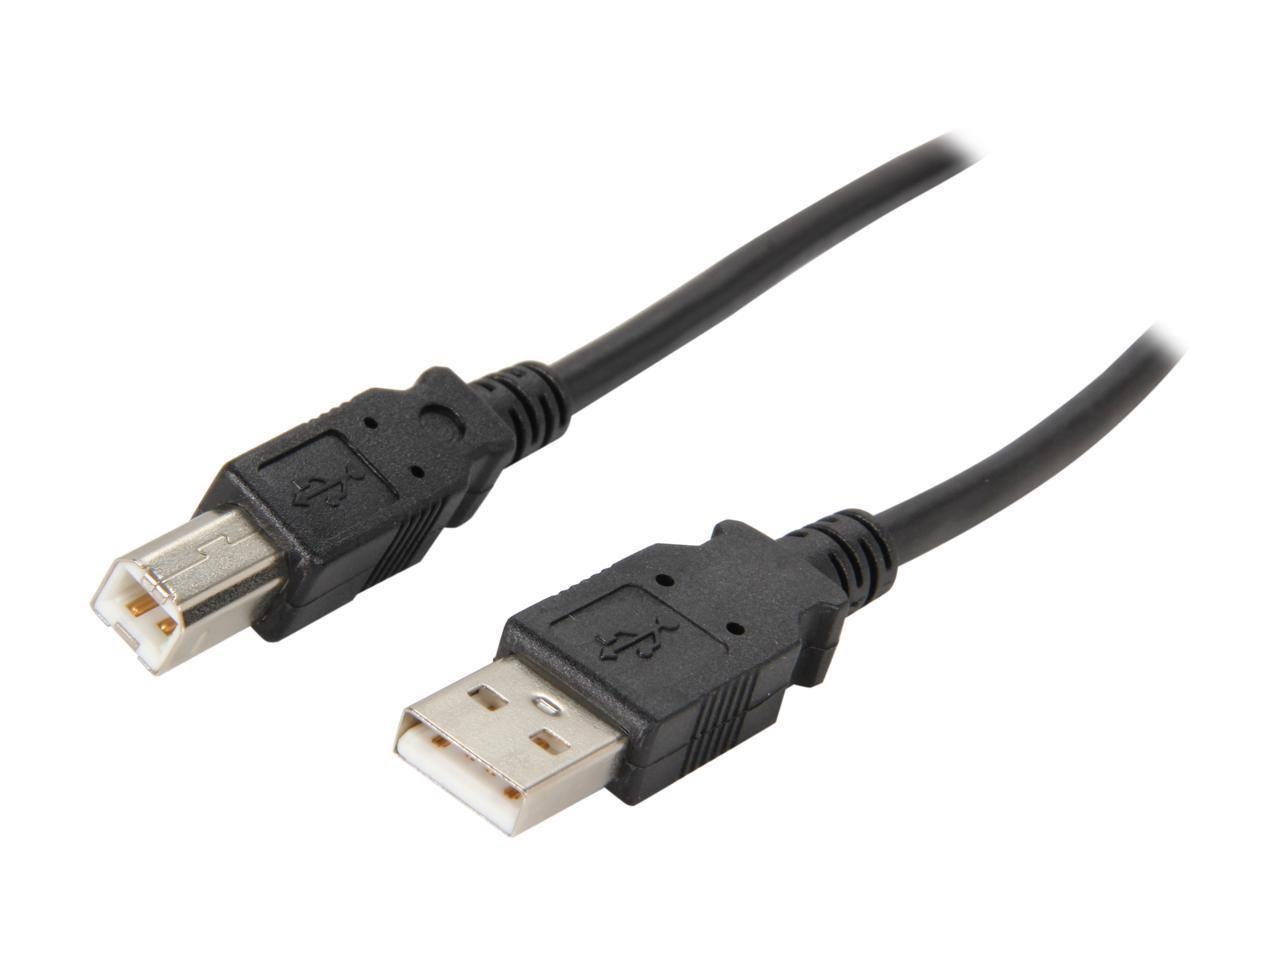 Bytecc Usb2-10Ab-K Black Type A Male To Type B Male Cable